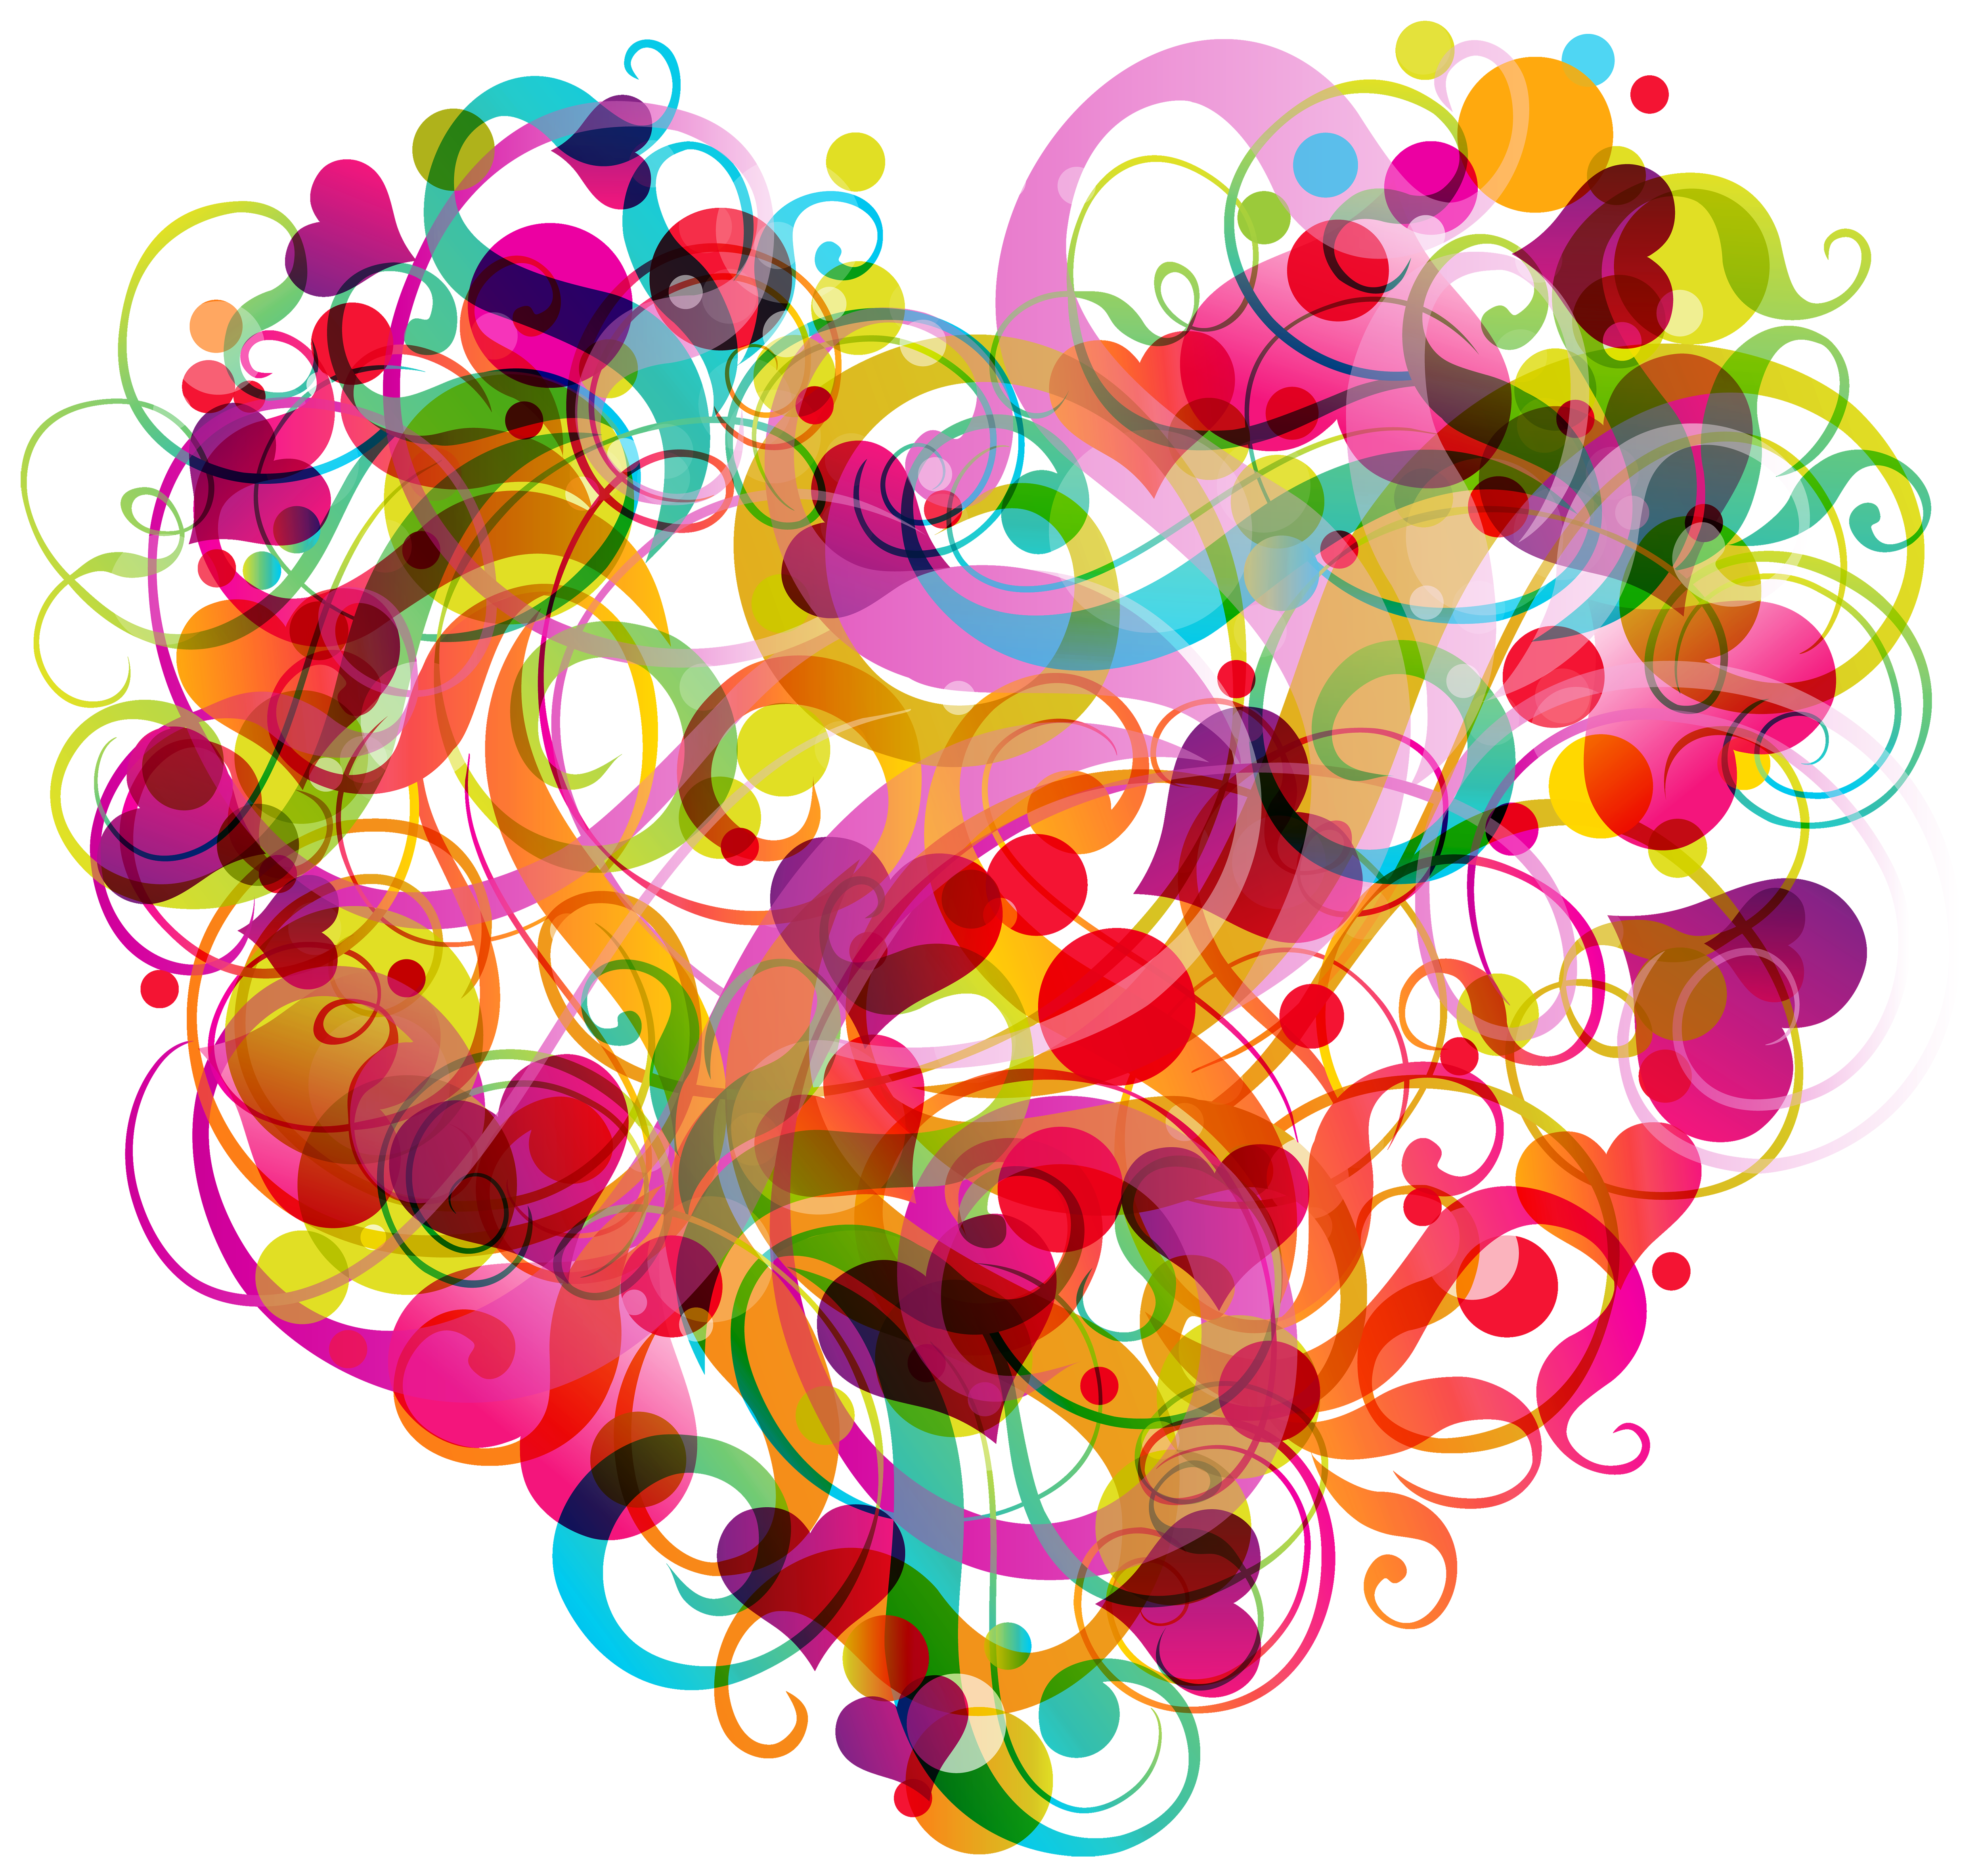 Abstract Colorful Heart PNG Clipart.